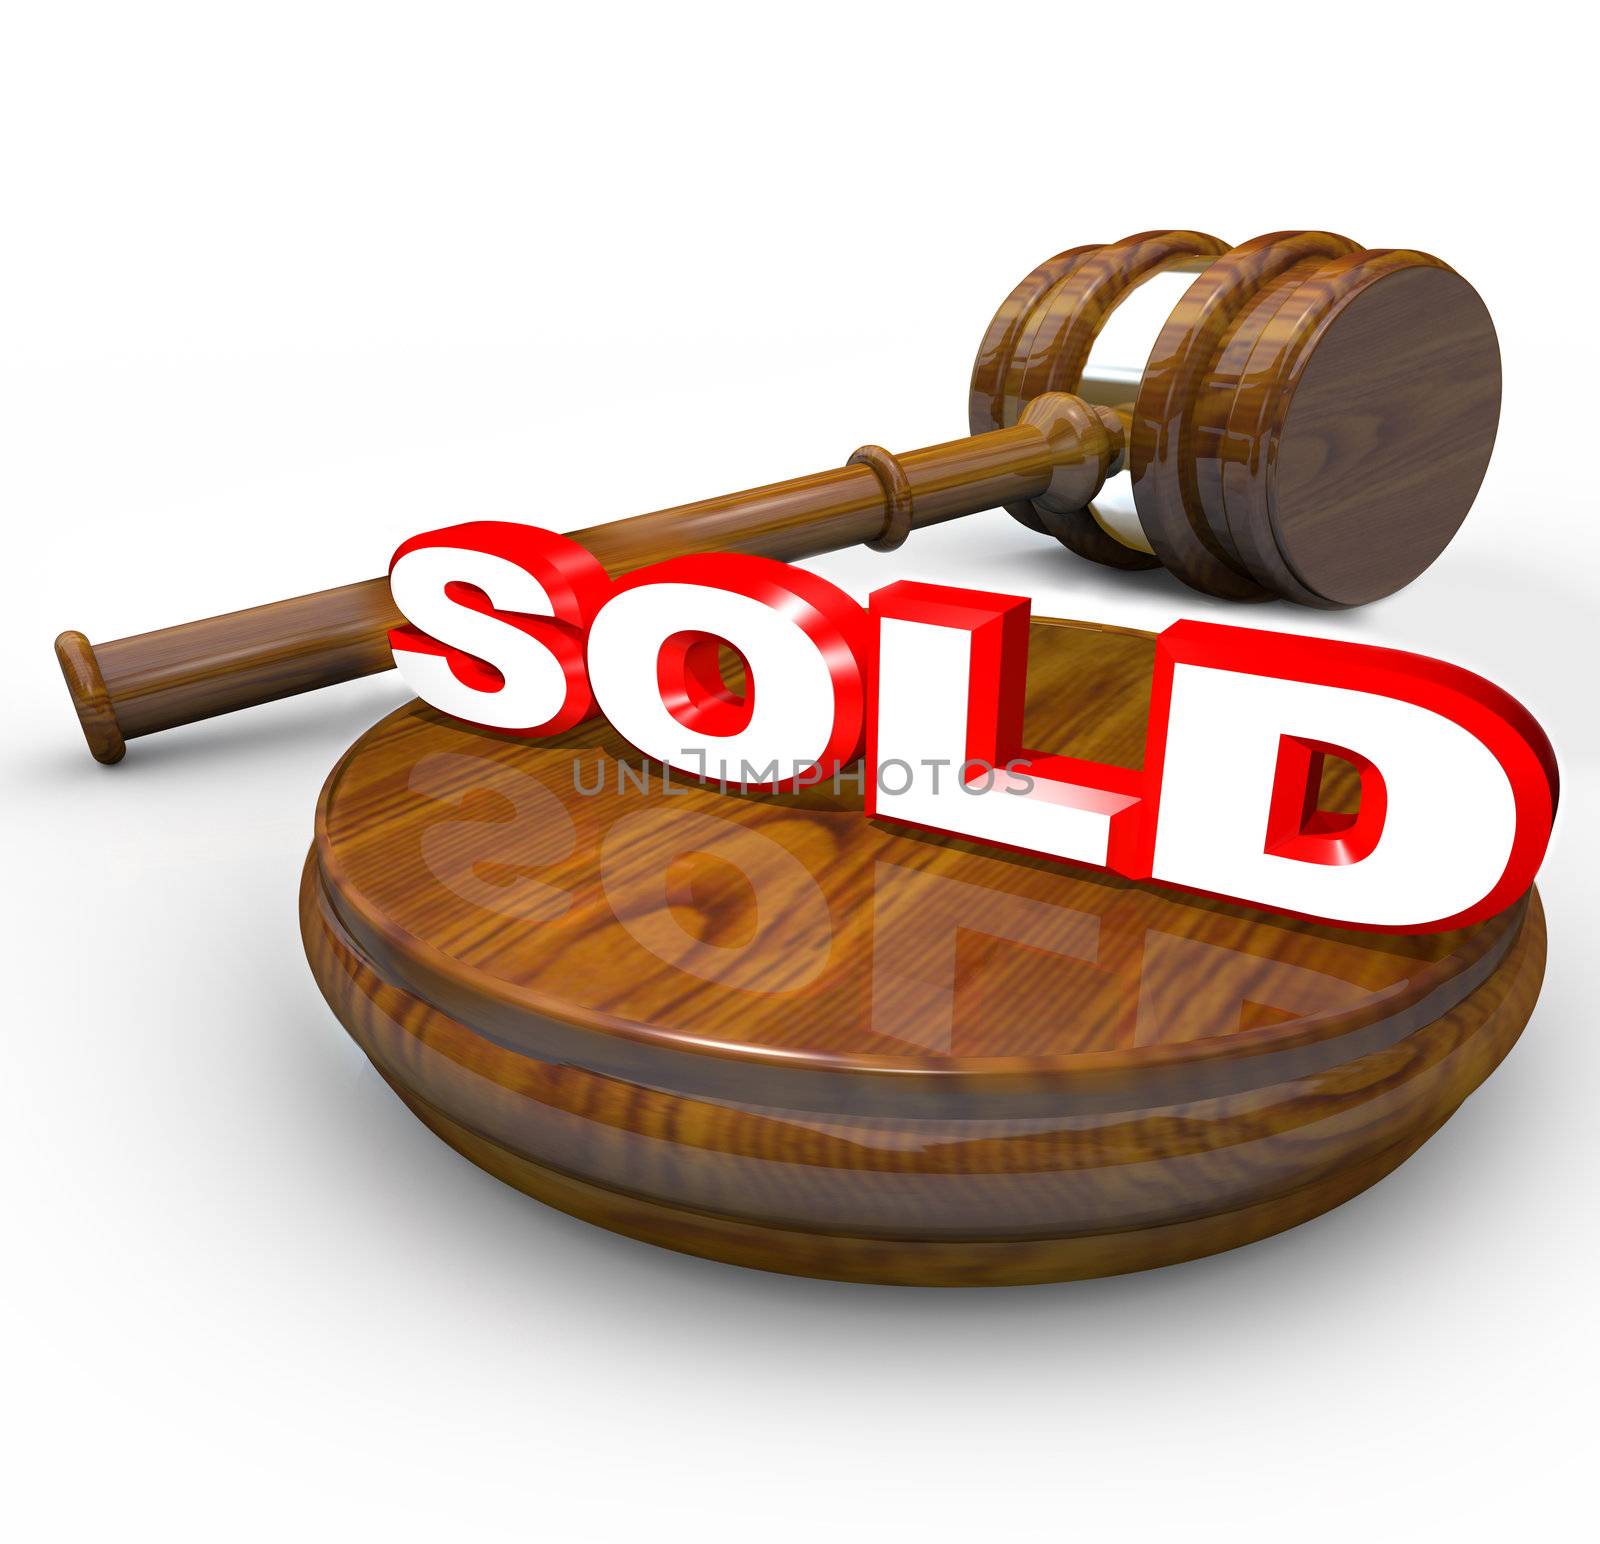 A gavel comes down on the word Sold to signify the end or closing of an auction and the buyer has been the highest bidder on an item